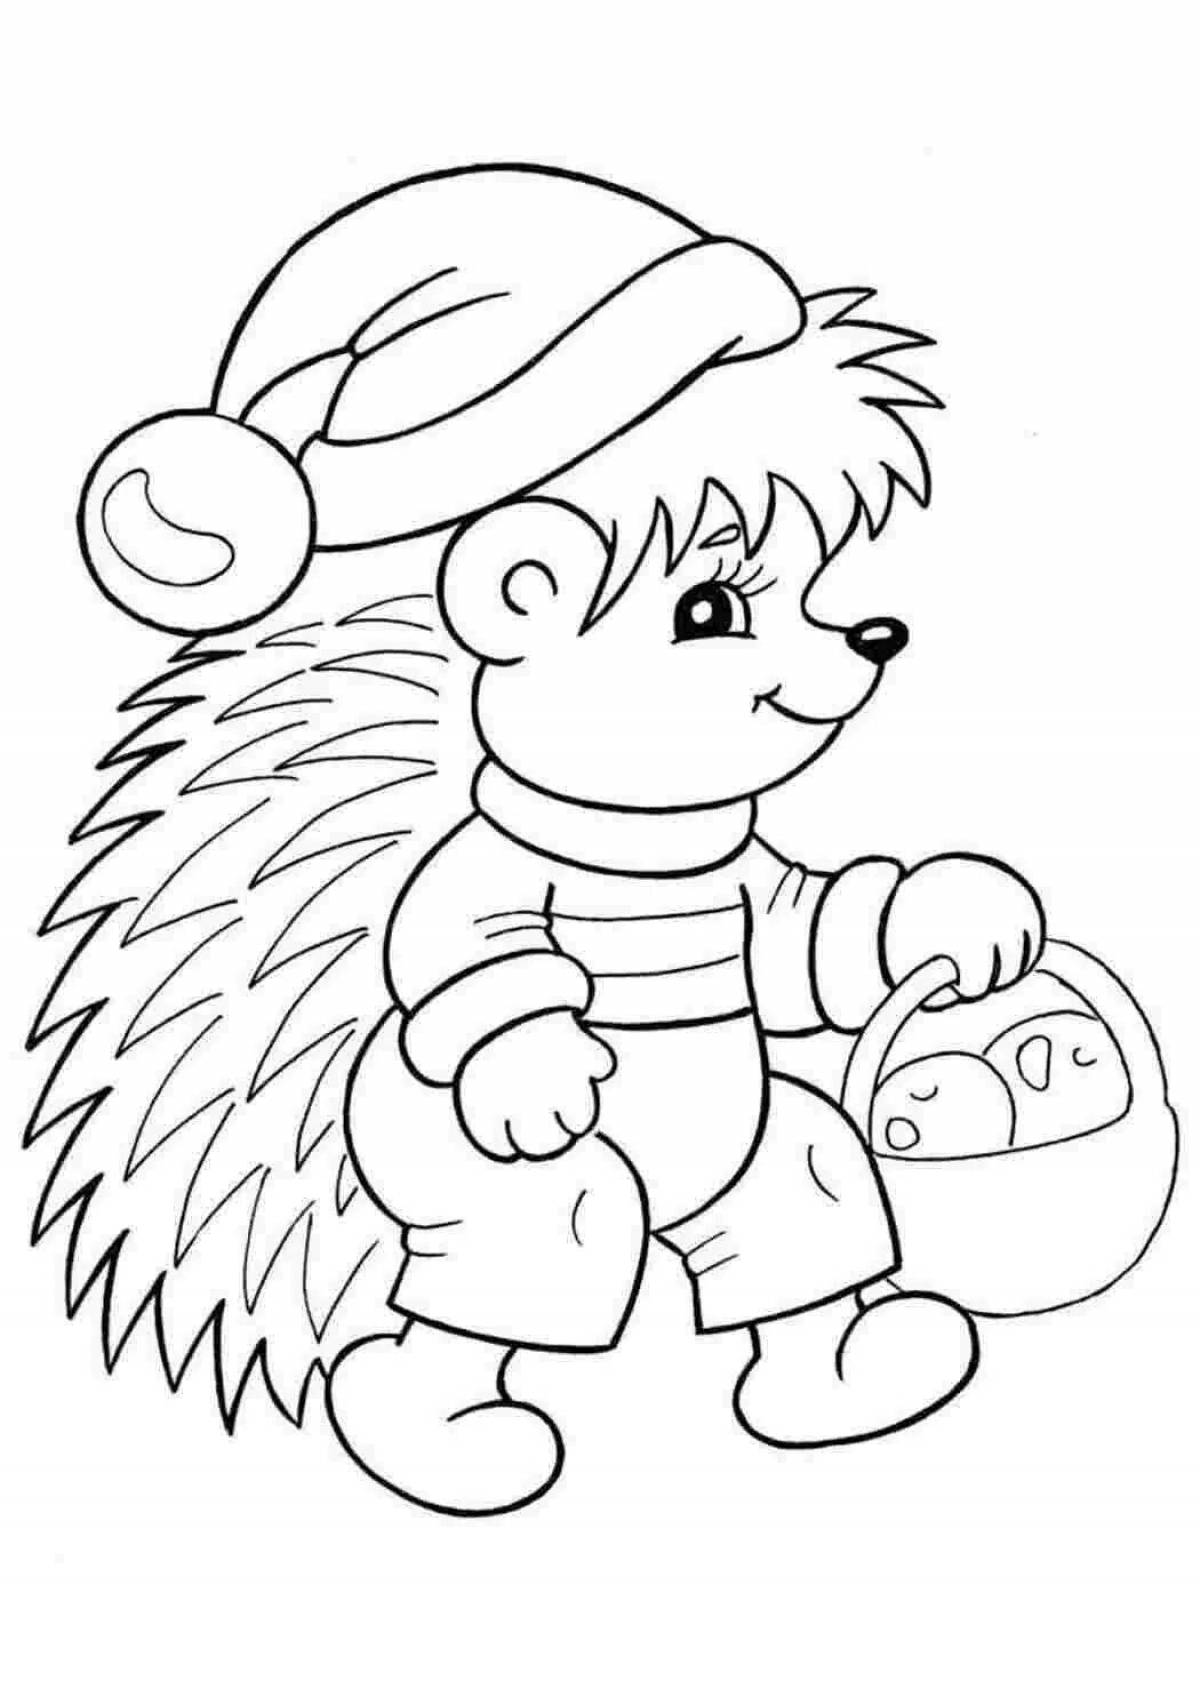 Cheerful coloring hedgehog new year